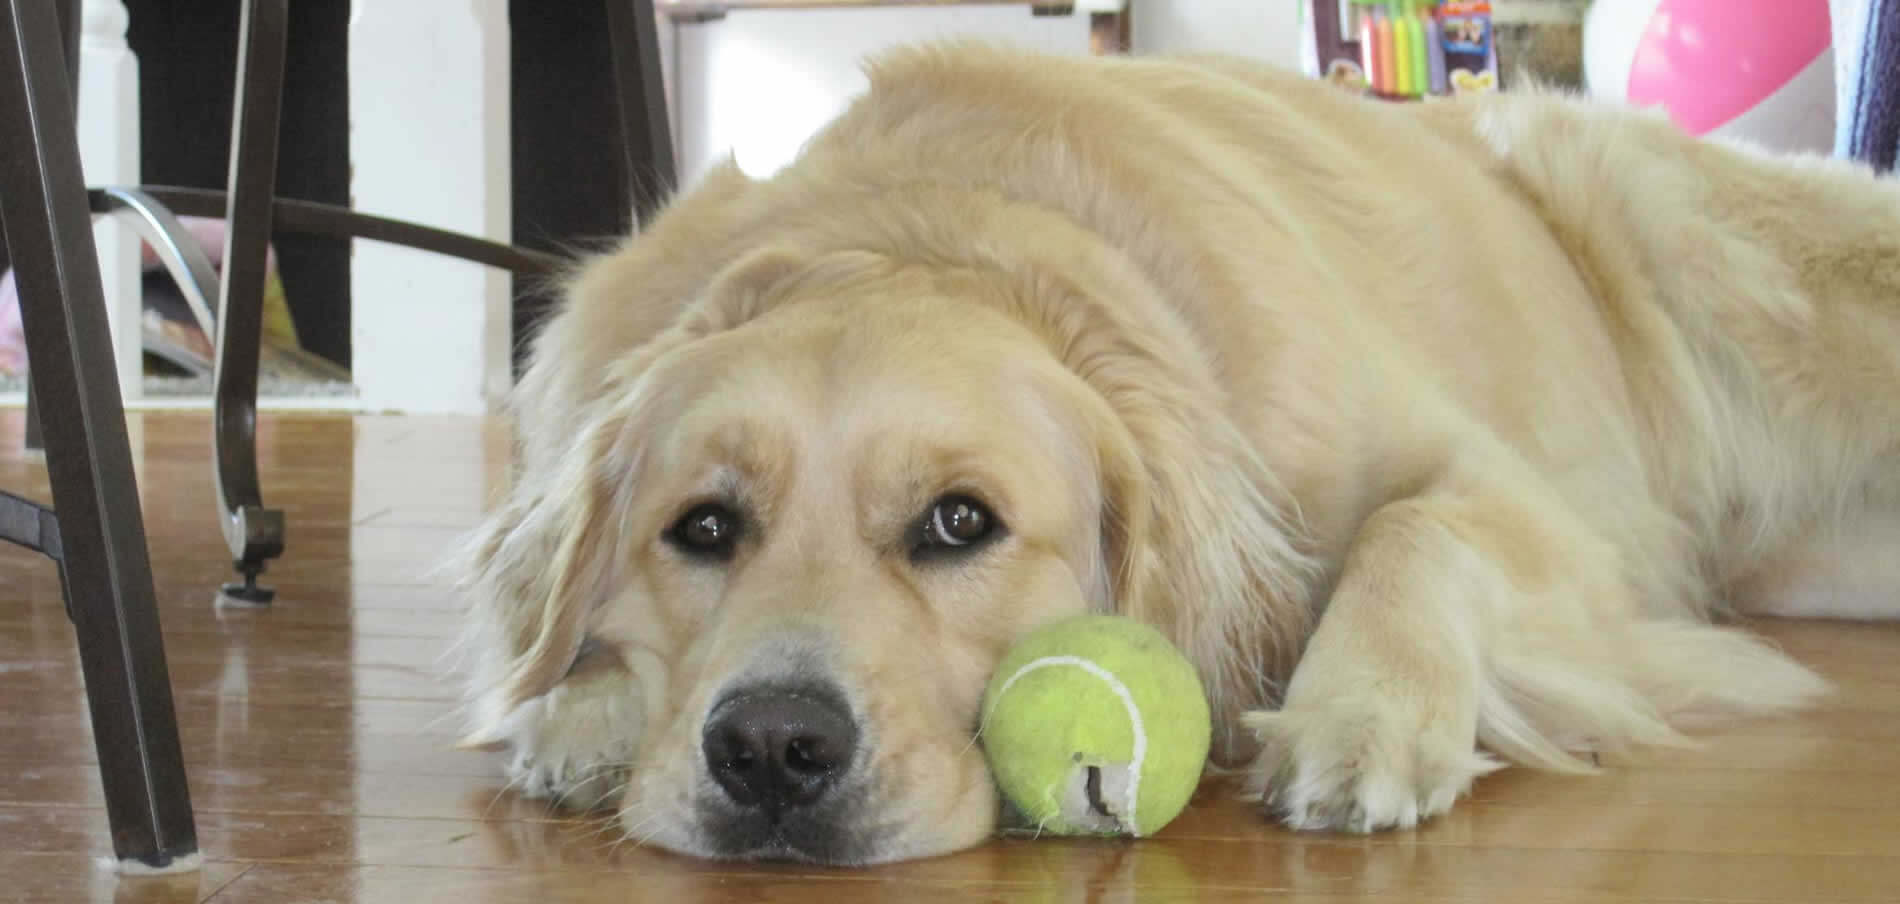 Sad Golden Retriever laying with ripped up tennis ball